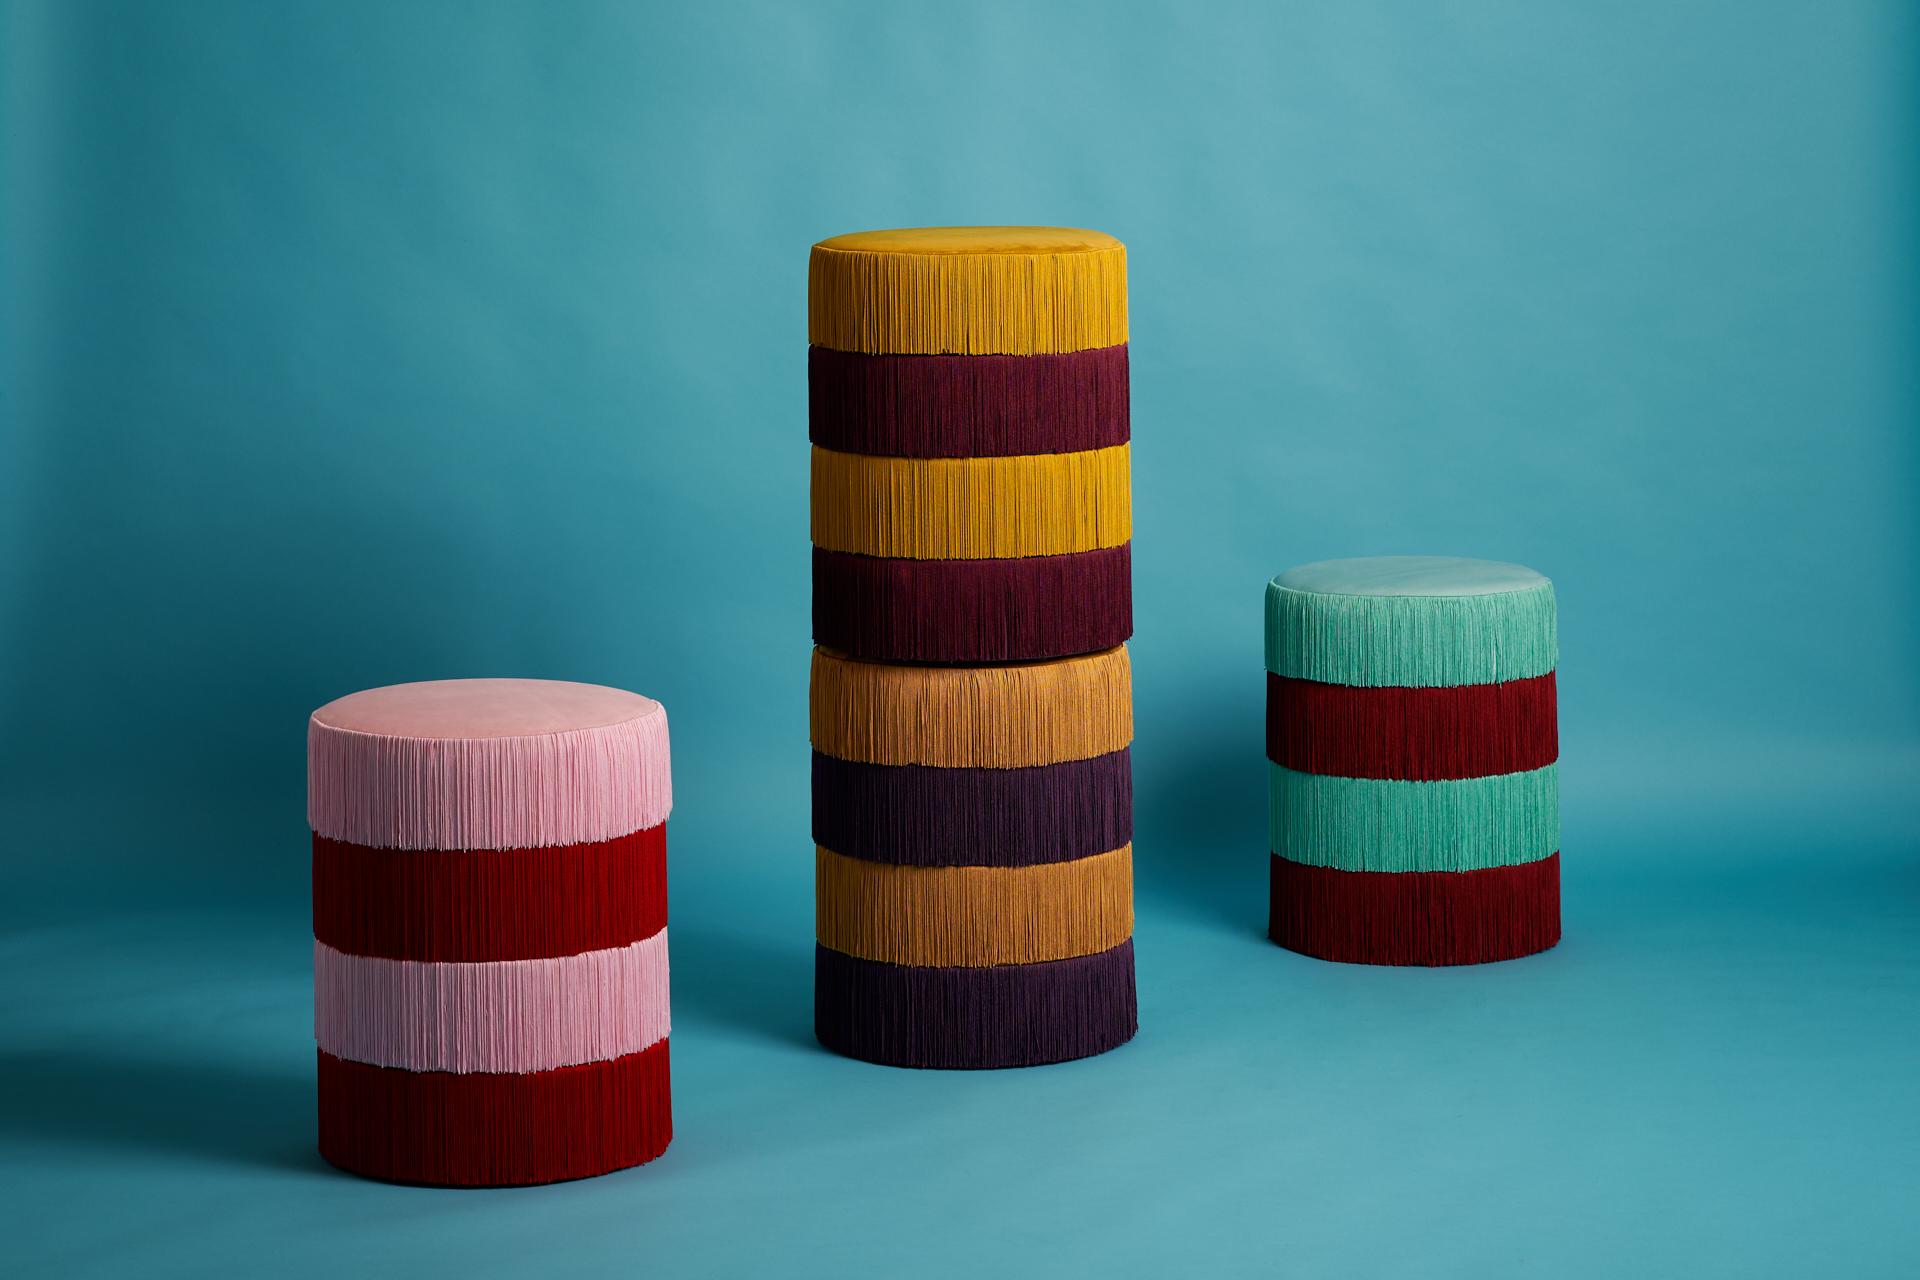 Chachachá Pouf by Houtique
Dimensions: H 45 x D 35 cm
Materials: Velvet upholstery, Wood

Art-deco style pouf with wood structure and velvet fabric. 4 modules connected by wooden sleepers, each one Formed by 2 fiber-board discs of 16mm, joined